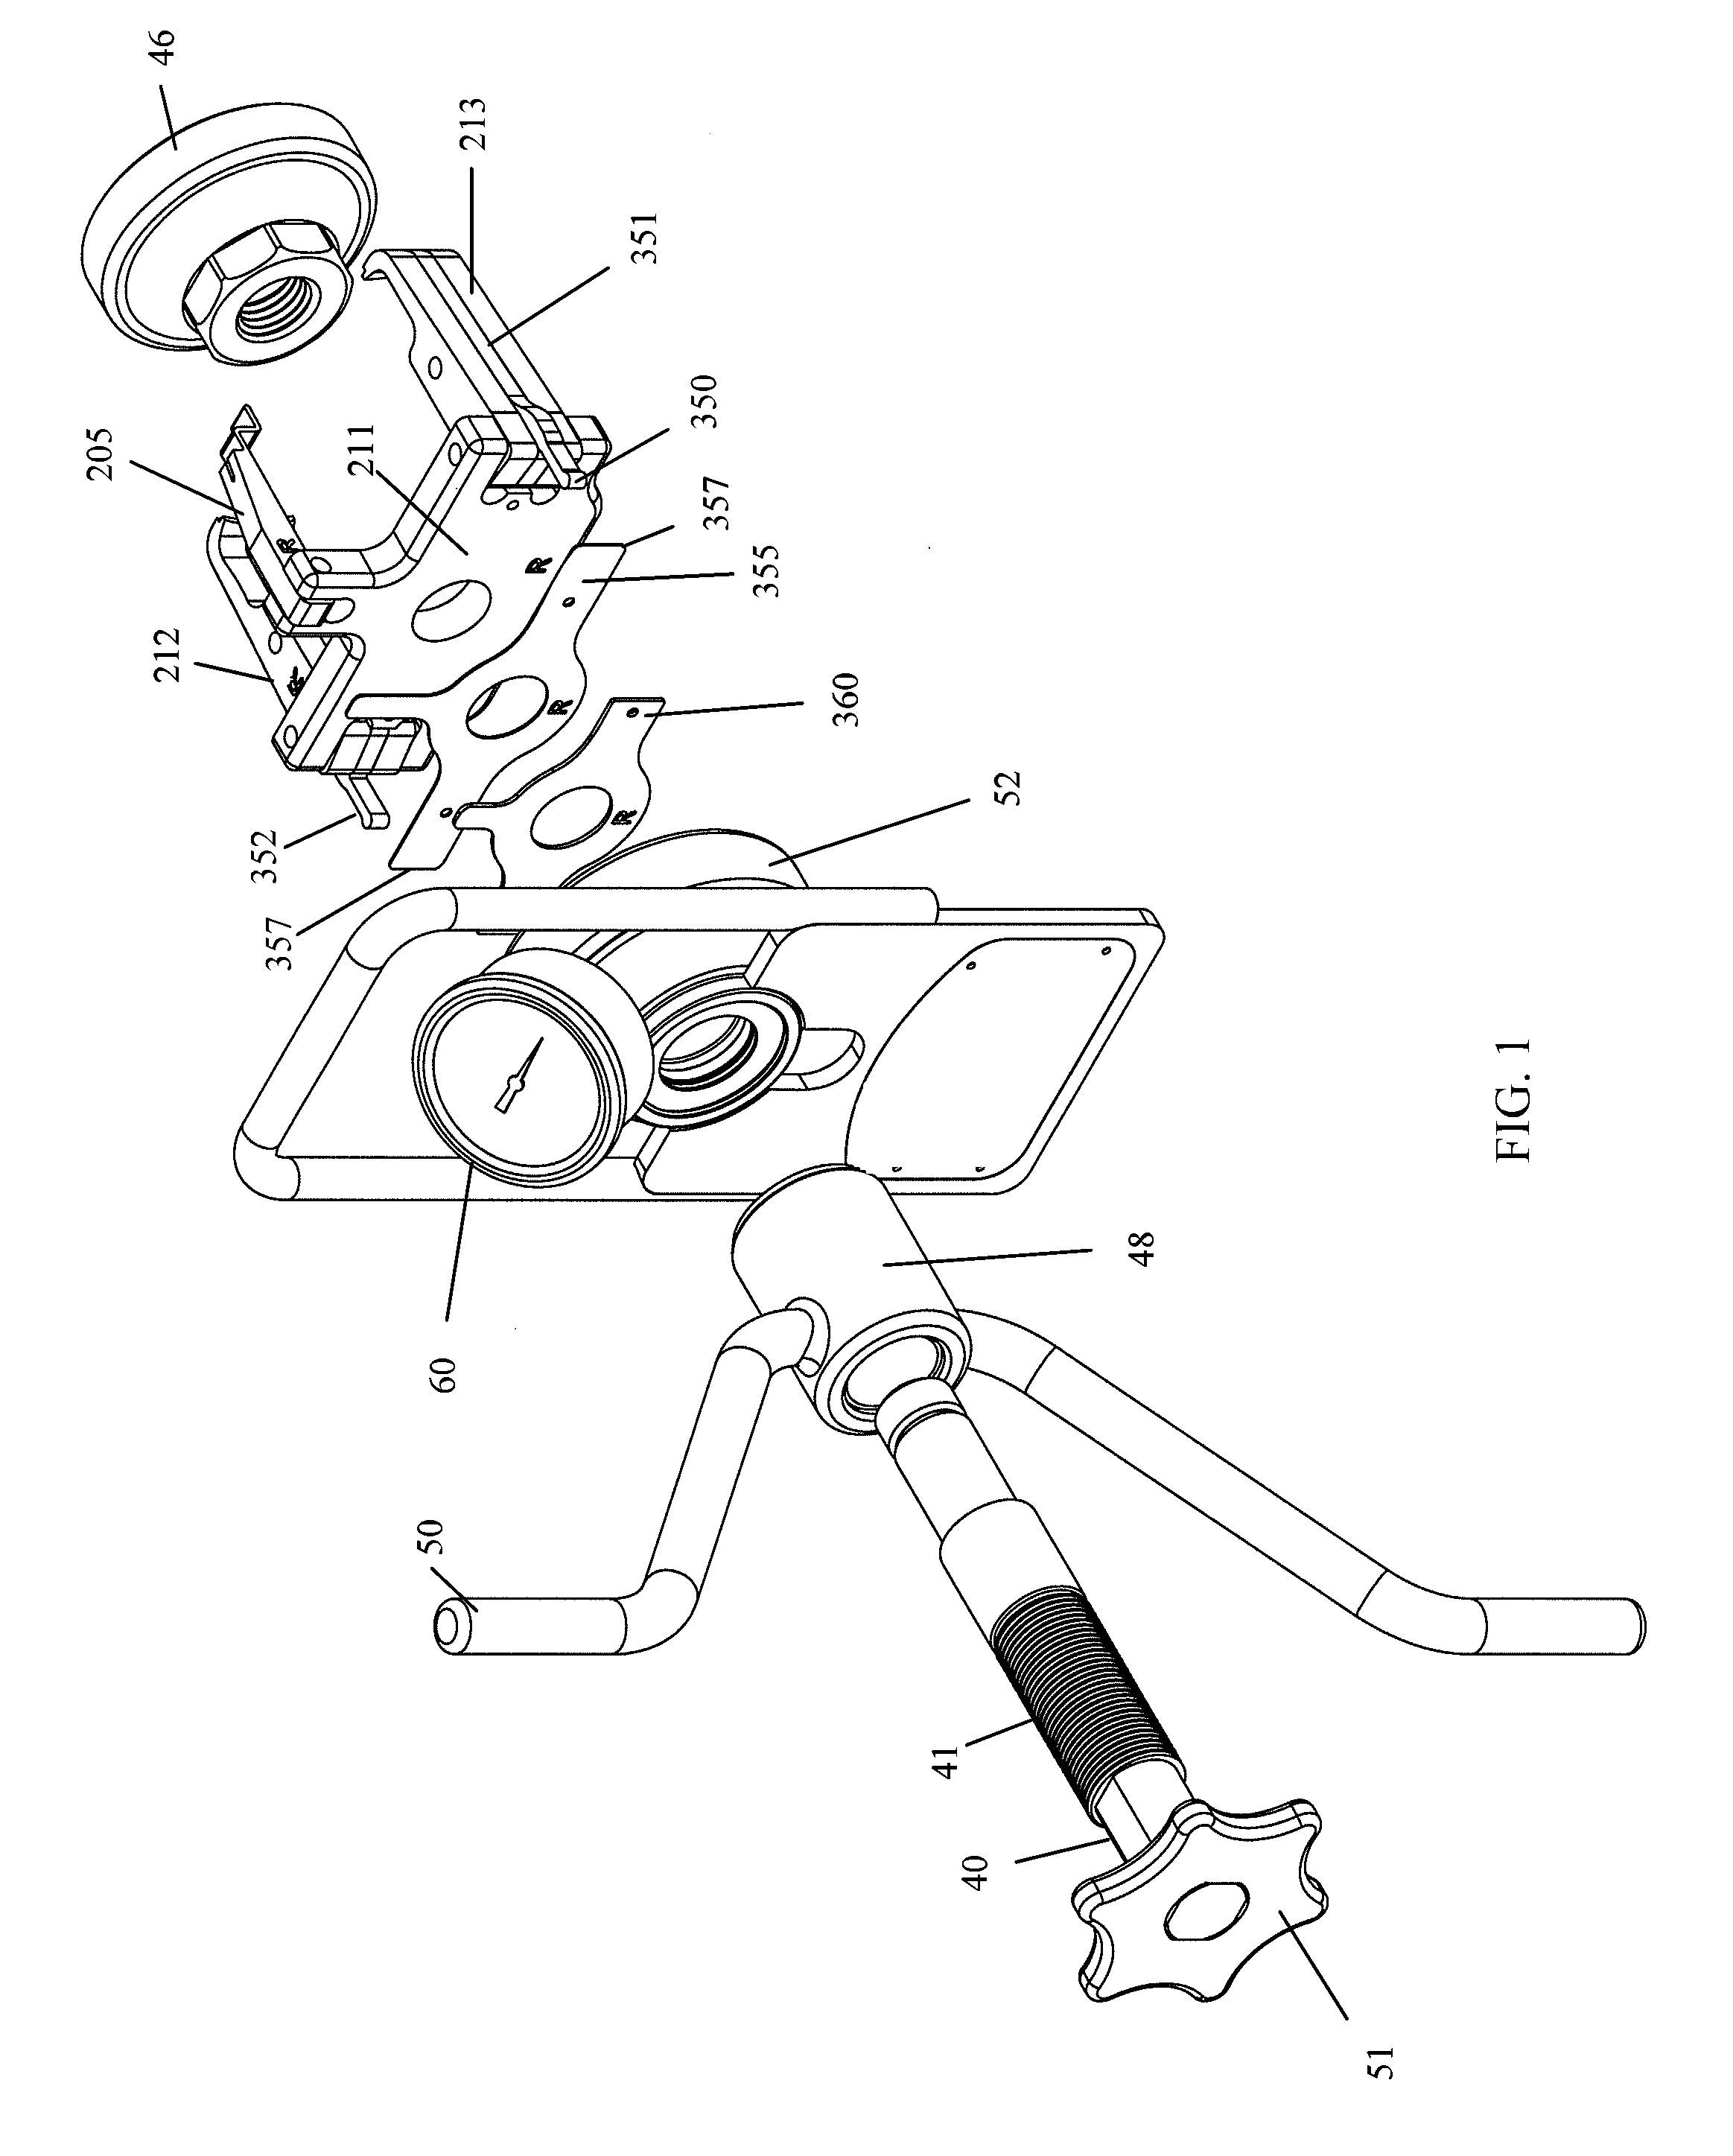 Systems and methods for preloading a bearing and aligning a lock nut